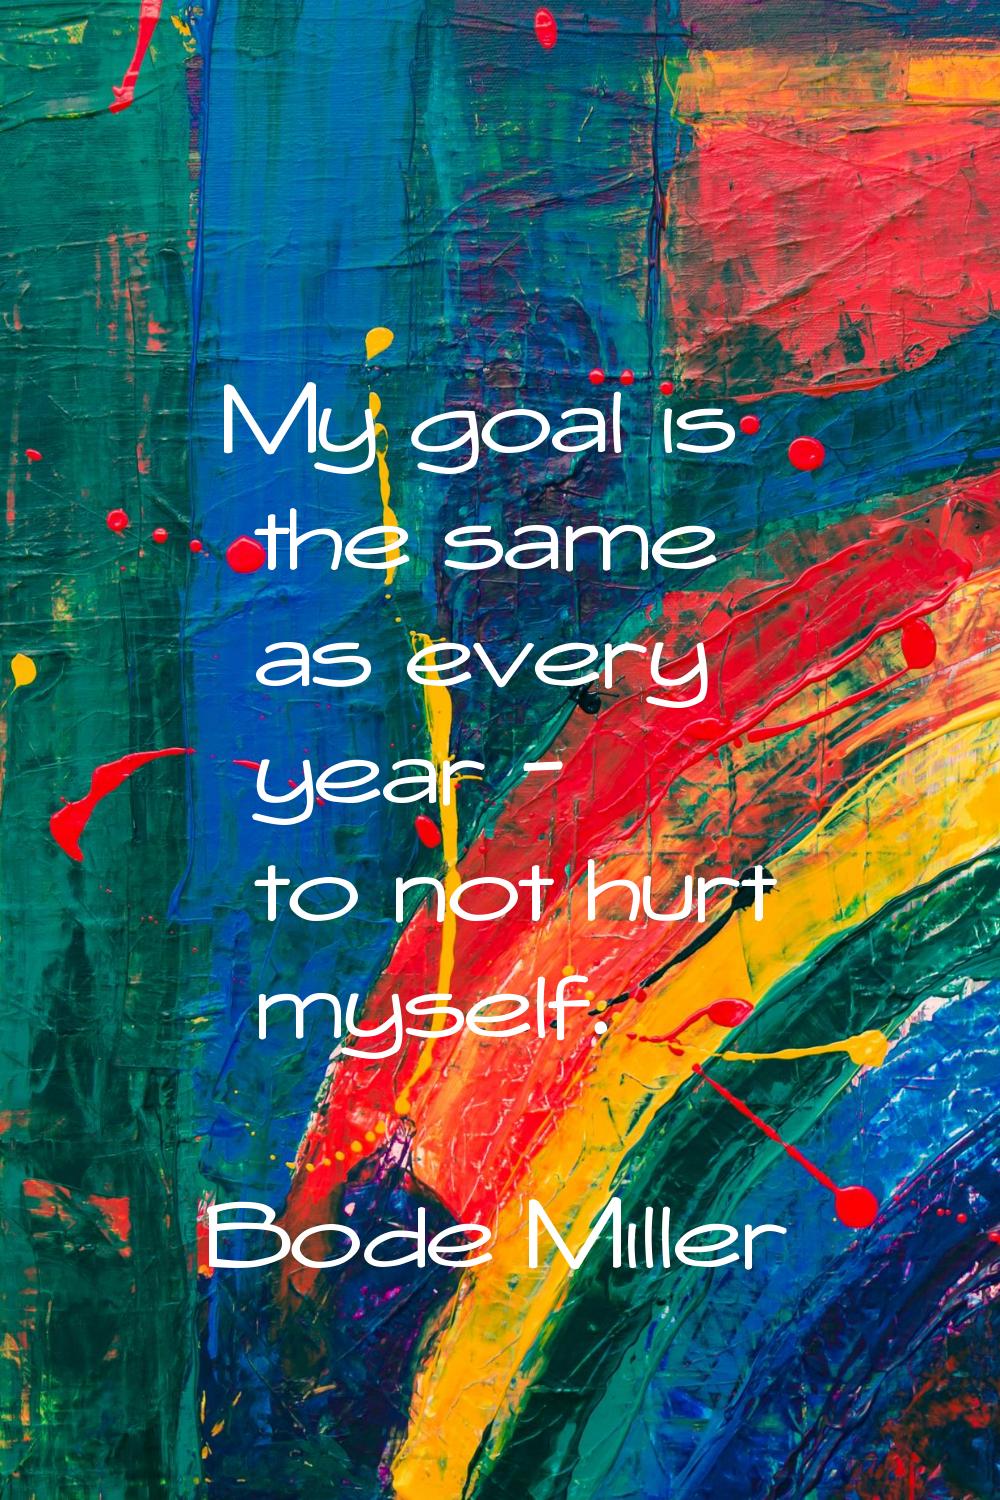 My goal is the same as every year - to not hurt myself.